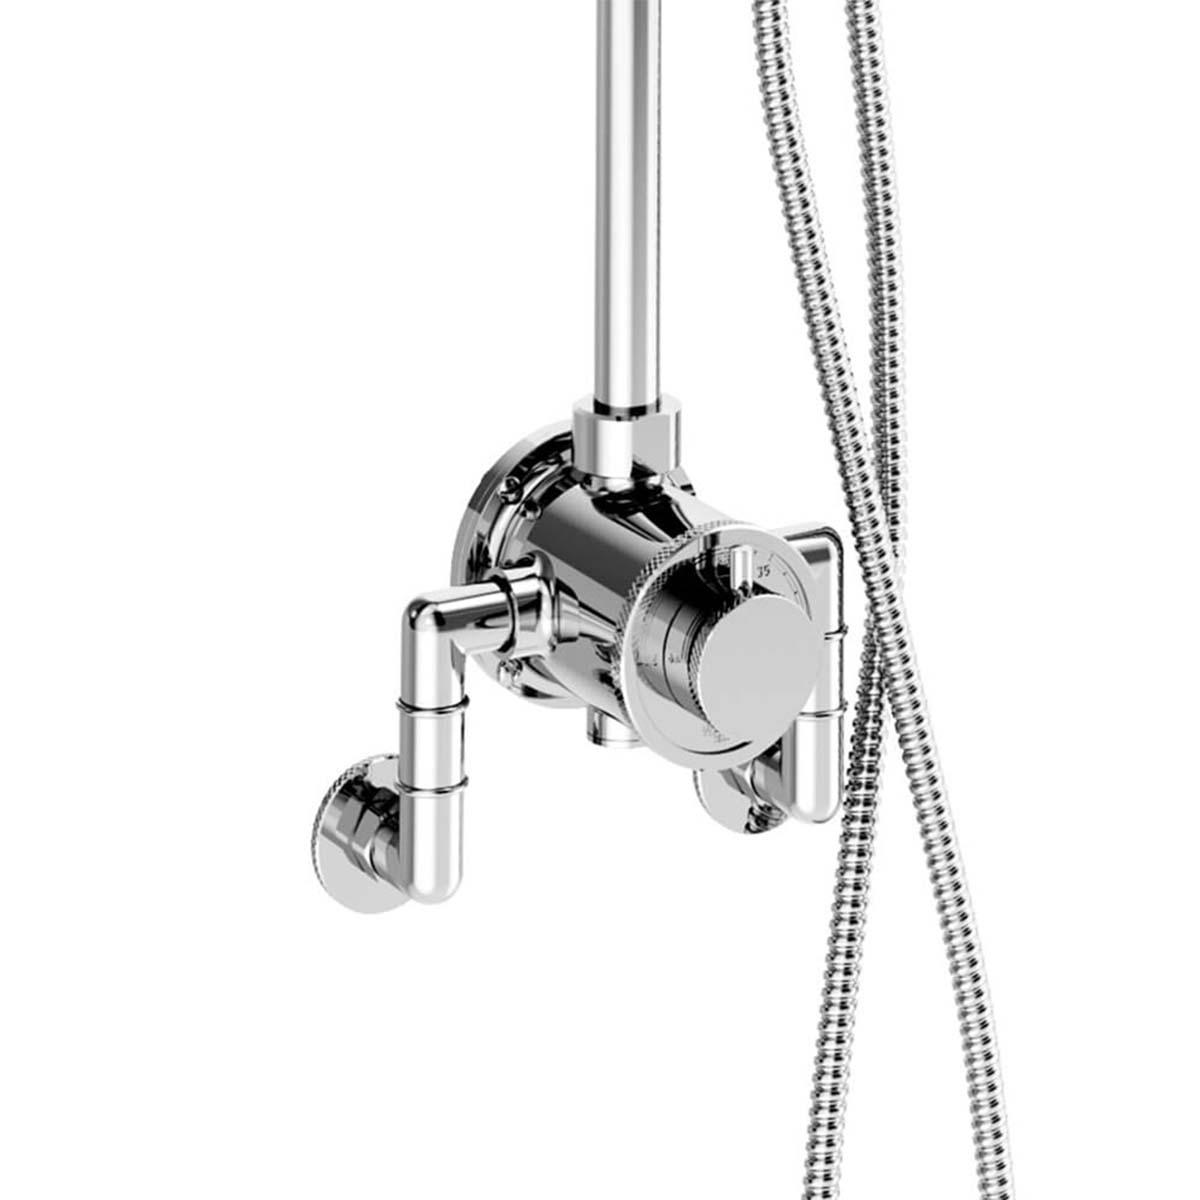 Crosswater MPRO Industrial Dual Outlet Valve With Rigid Riser and Shower Set With Overhead Chrome Close Up